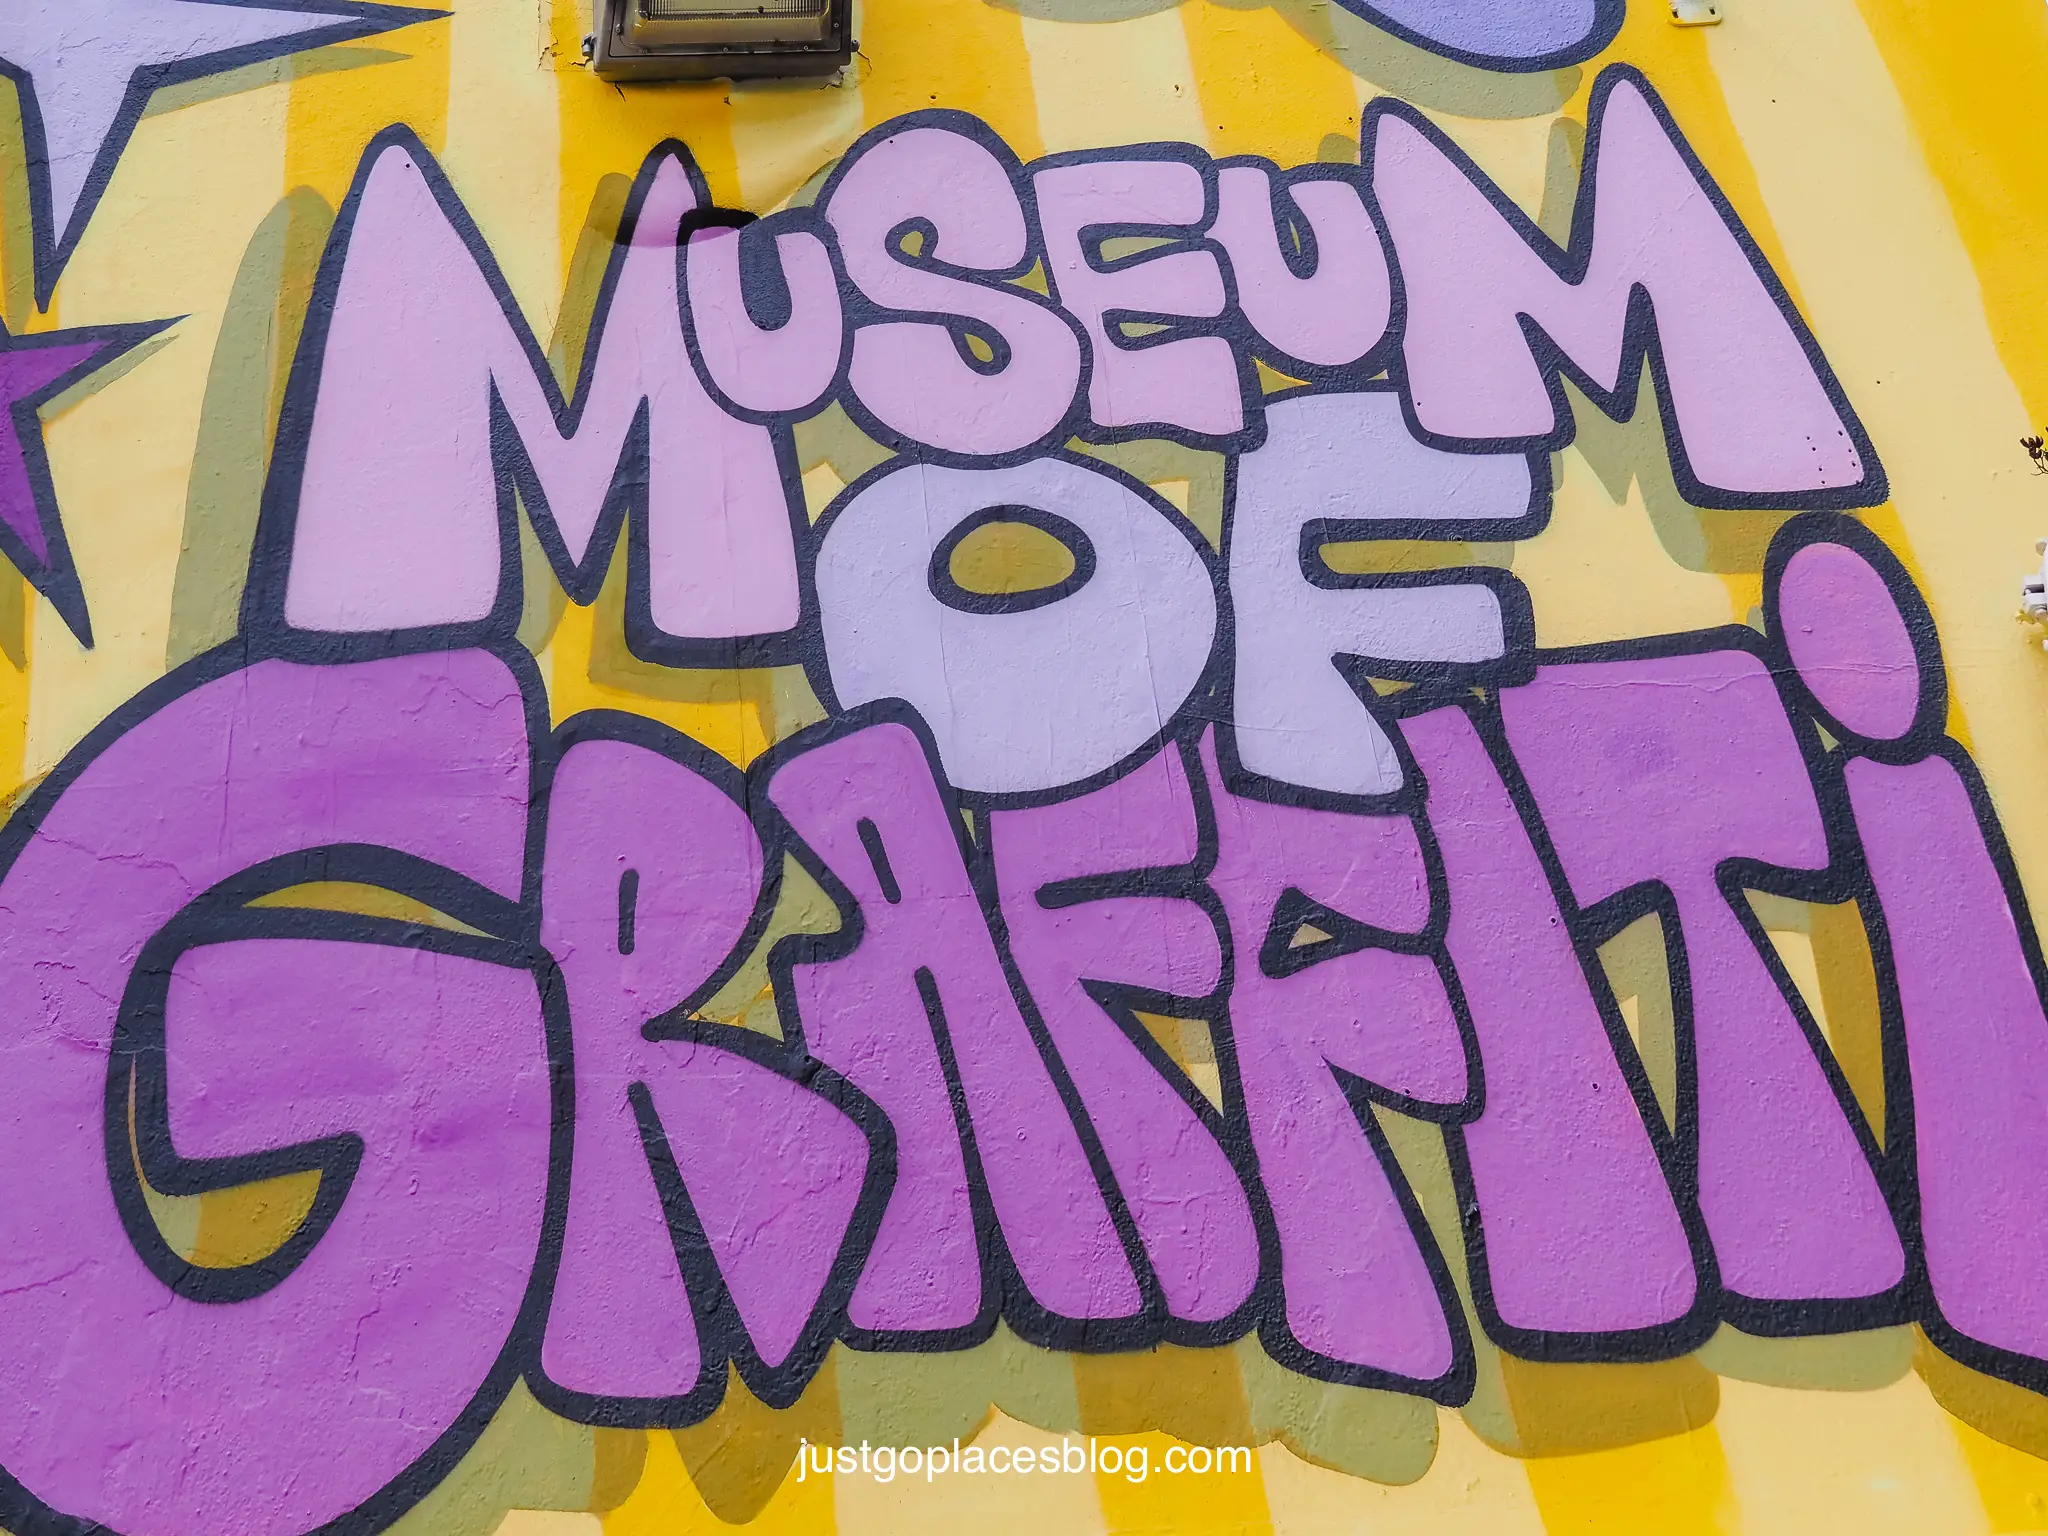 The Museum of Graffiti sign